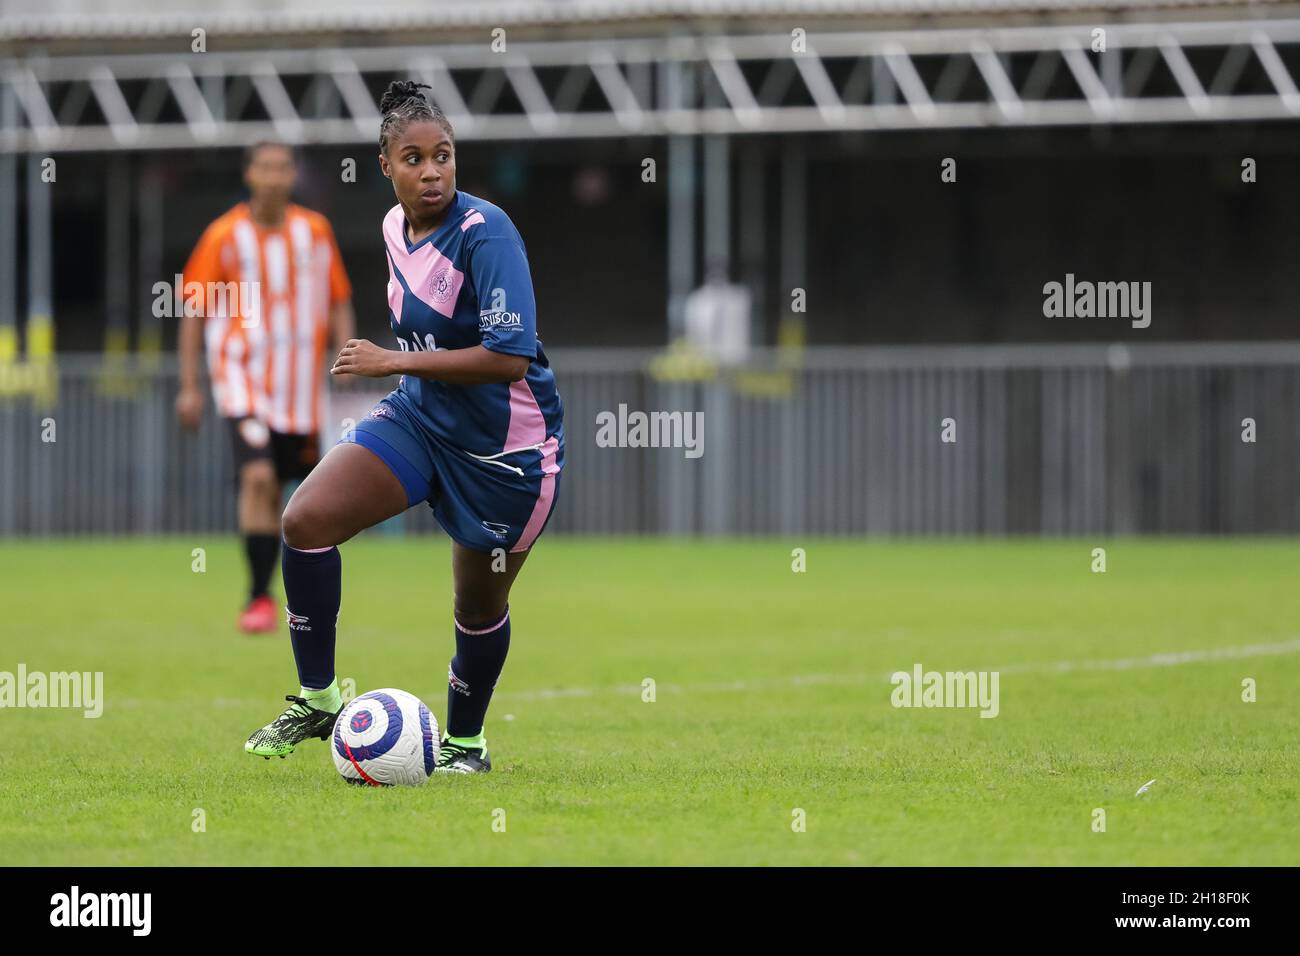 London, UK. 17th Oct, 2021. London, England, October 17th 20 Hannah Baptiste (15 Dulwich Hamlet) in action at the London and South East Regional Womens Premier game between Dulwich Hamlet and Ashford at Champion Hill in London, England. Liam Asman/SPP Credit: SPP Sport Press Photo. /Alamy Live News Stock Photo